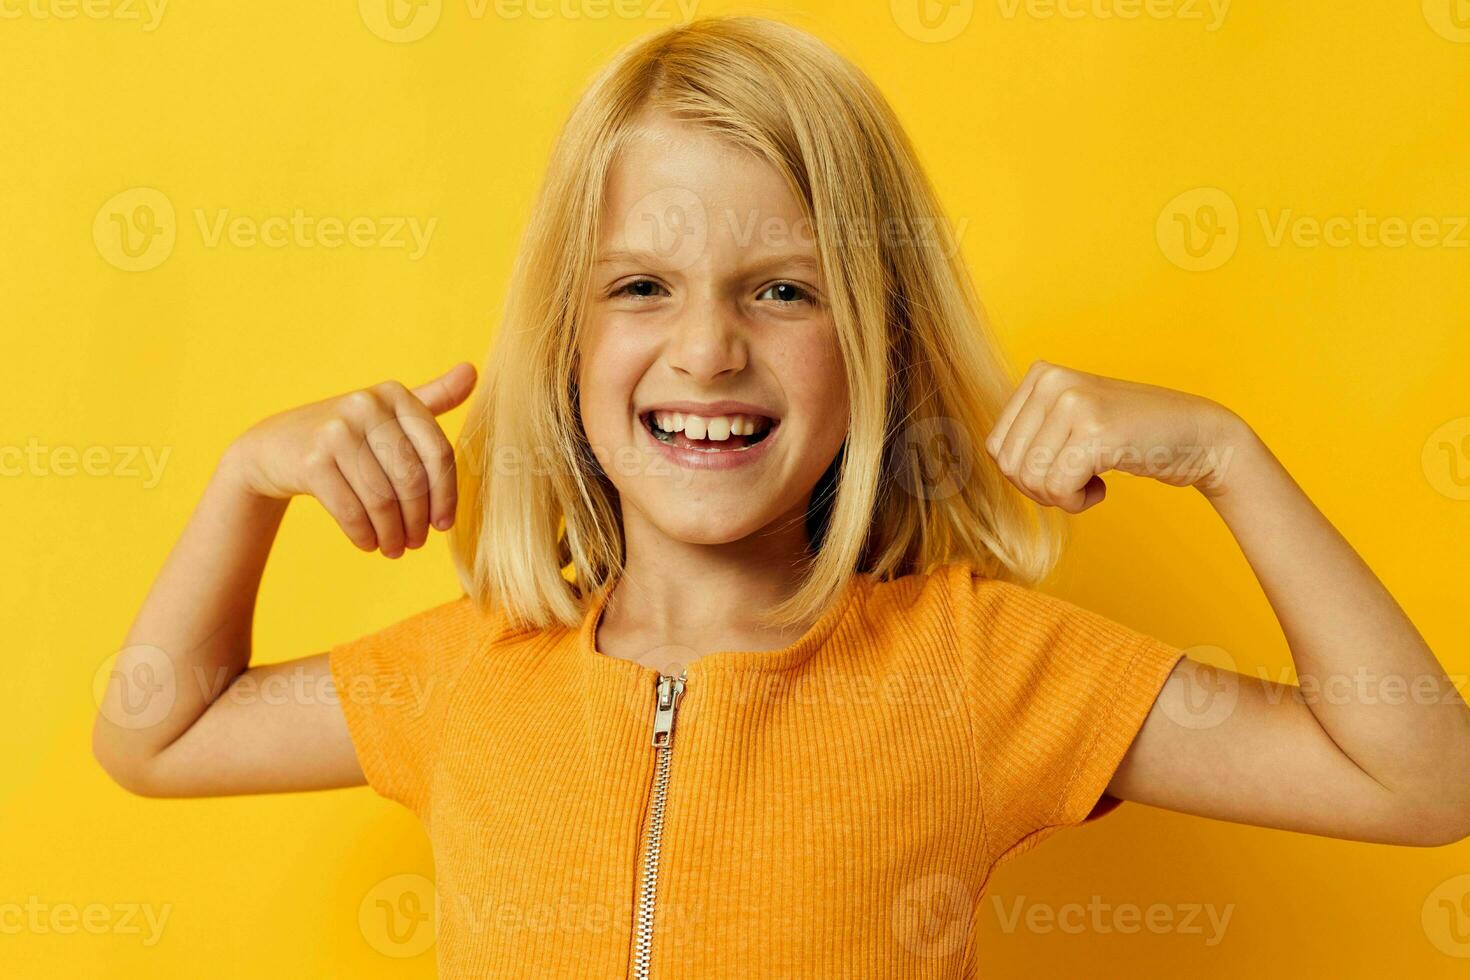 portrait of a little girl in a yellow t-shirt smile posing studio childhood lifestyle unaltered photo